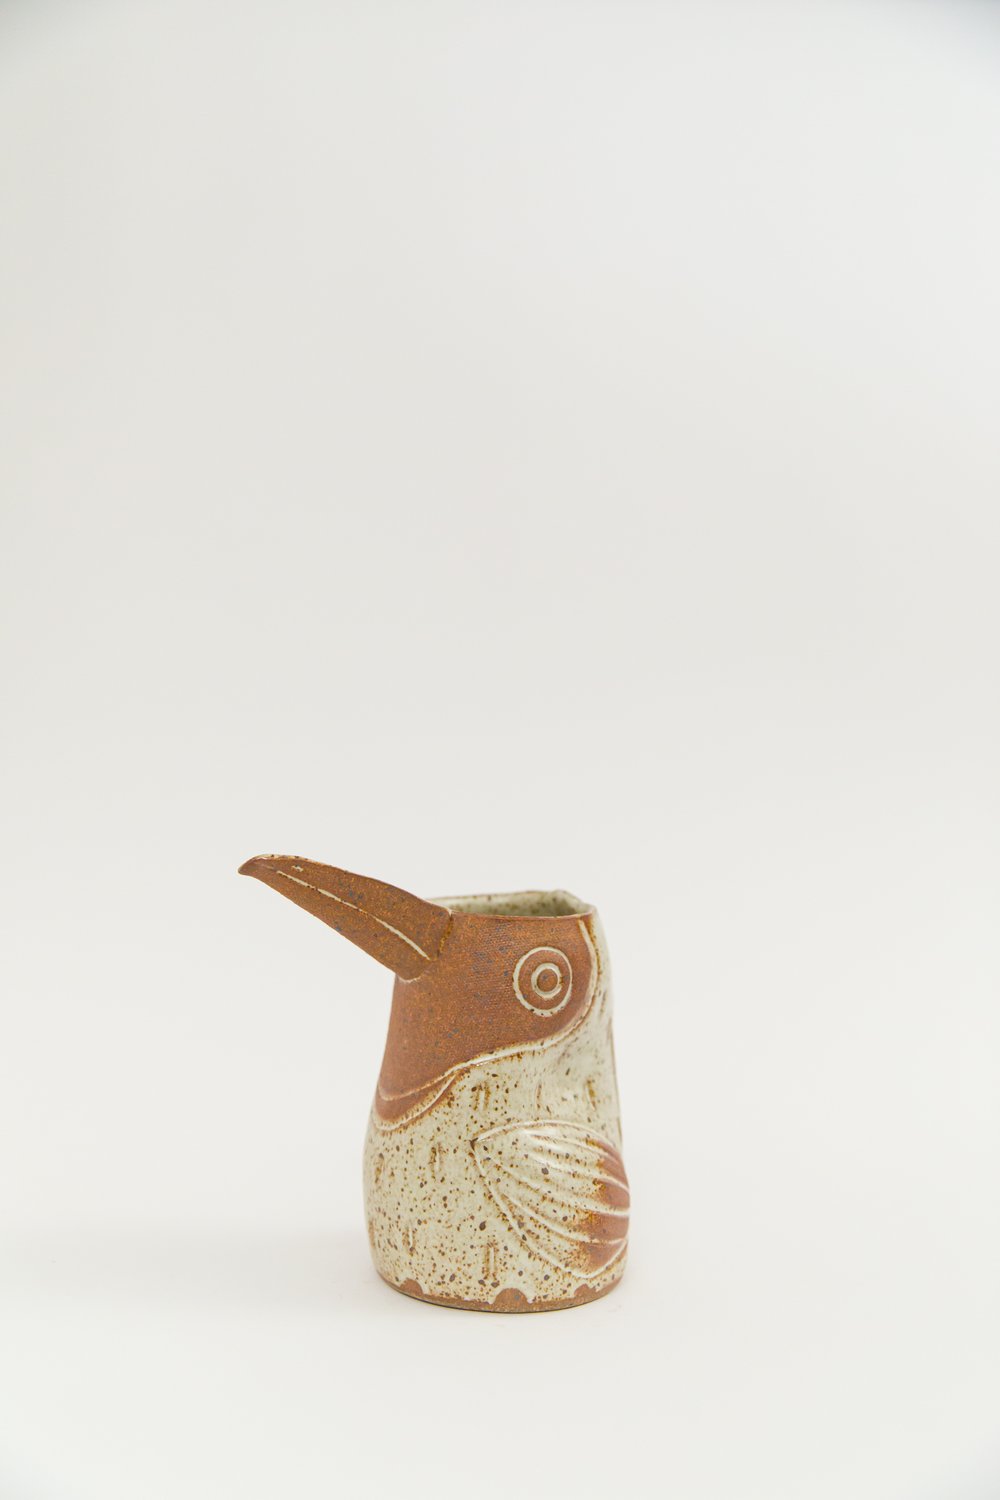 Image of Medium Iron Speckled Toasty Handleless Toucan Pitcher